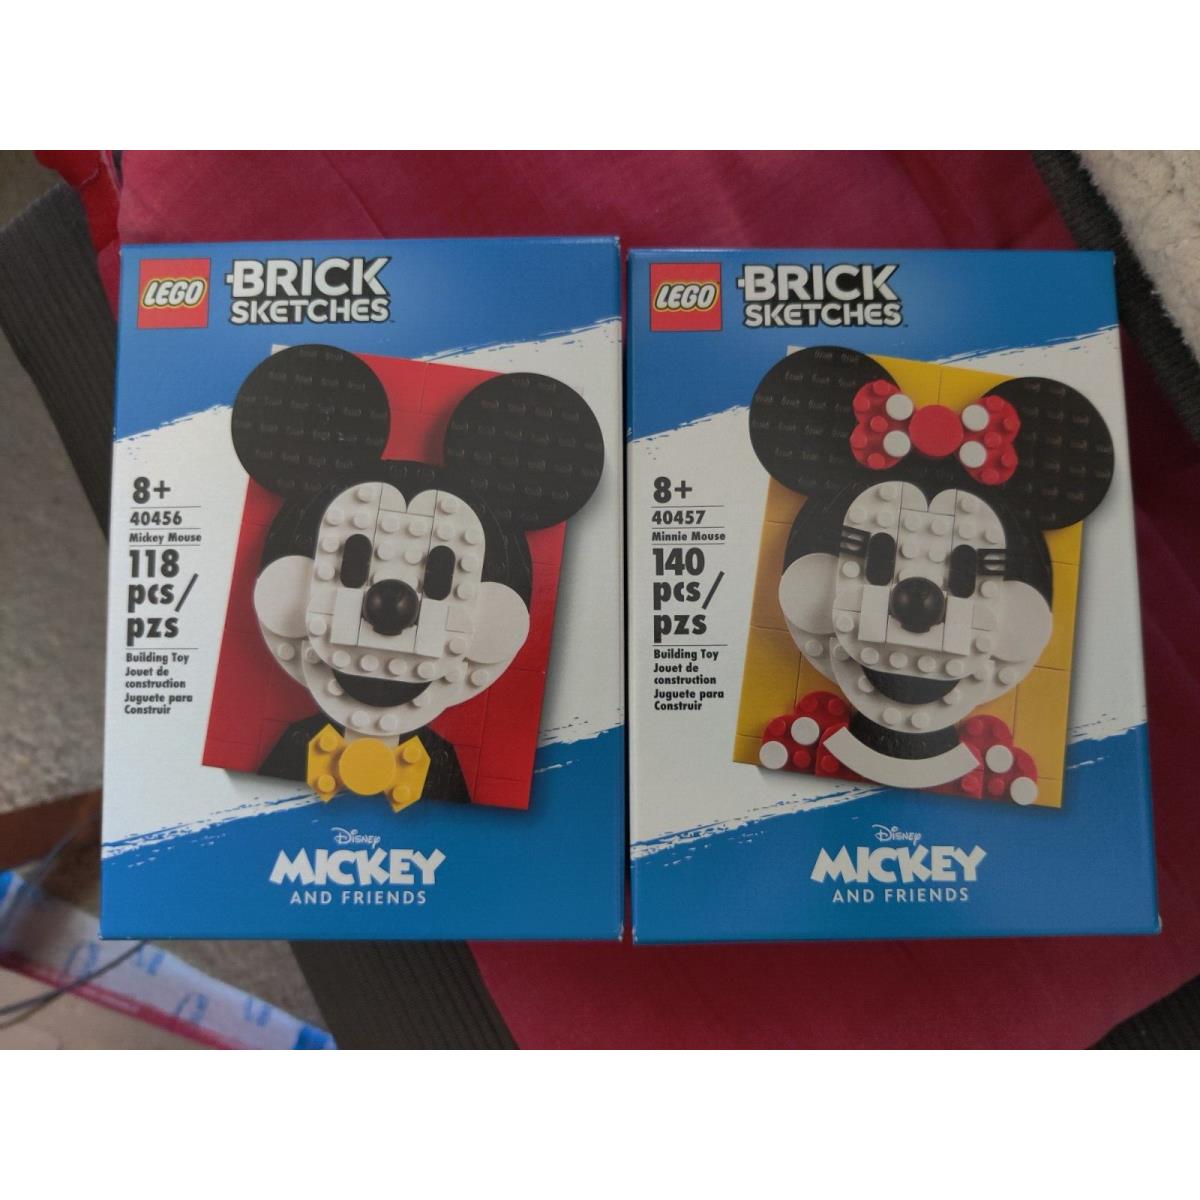 Lego Brick Sketches Disney Mickey 40456 and Minnie Mouse 40457